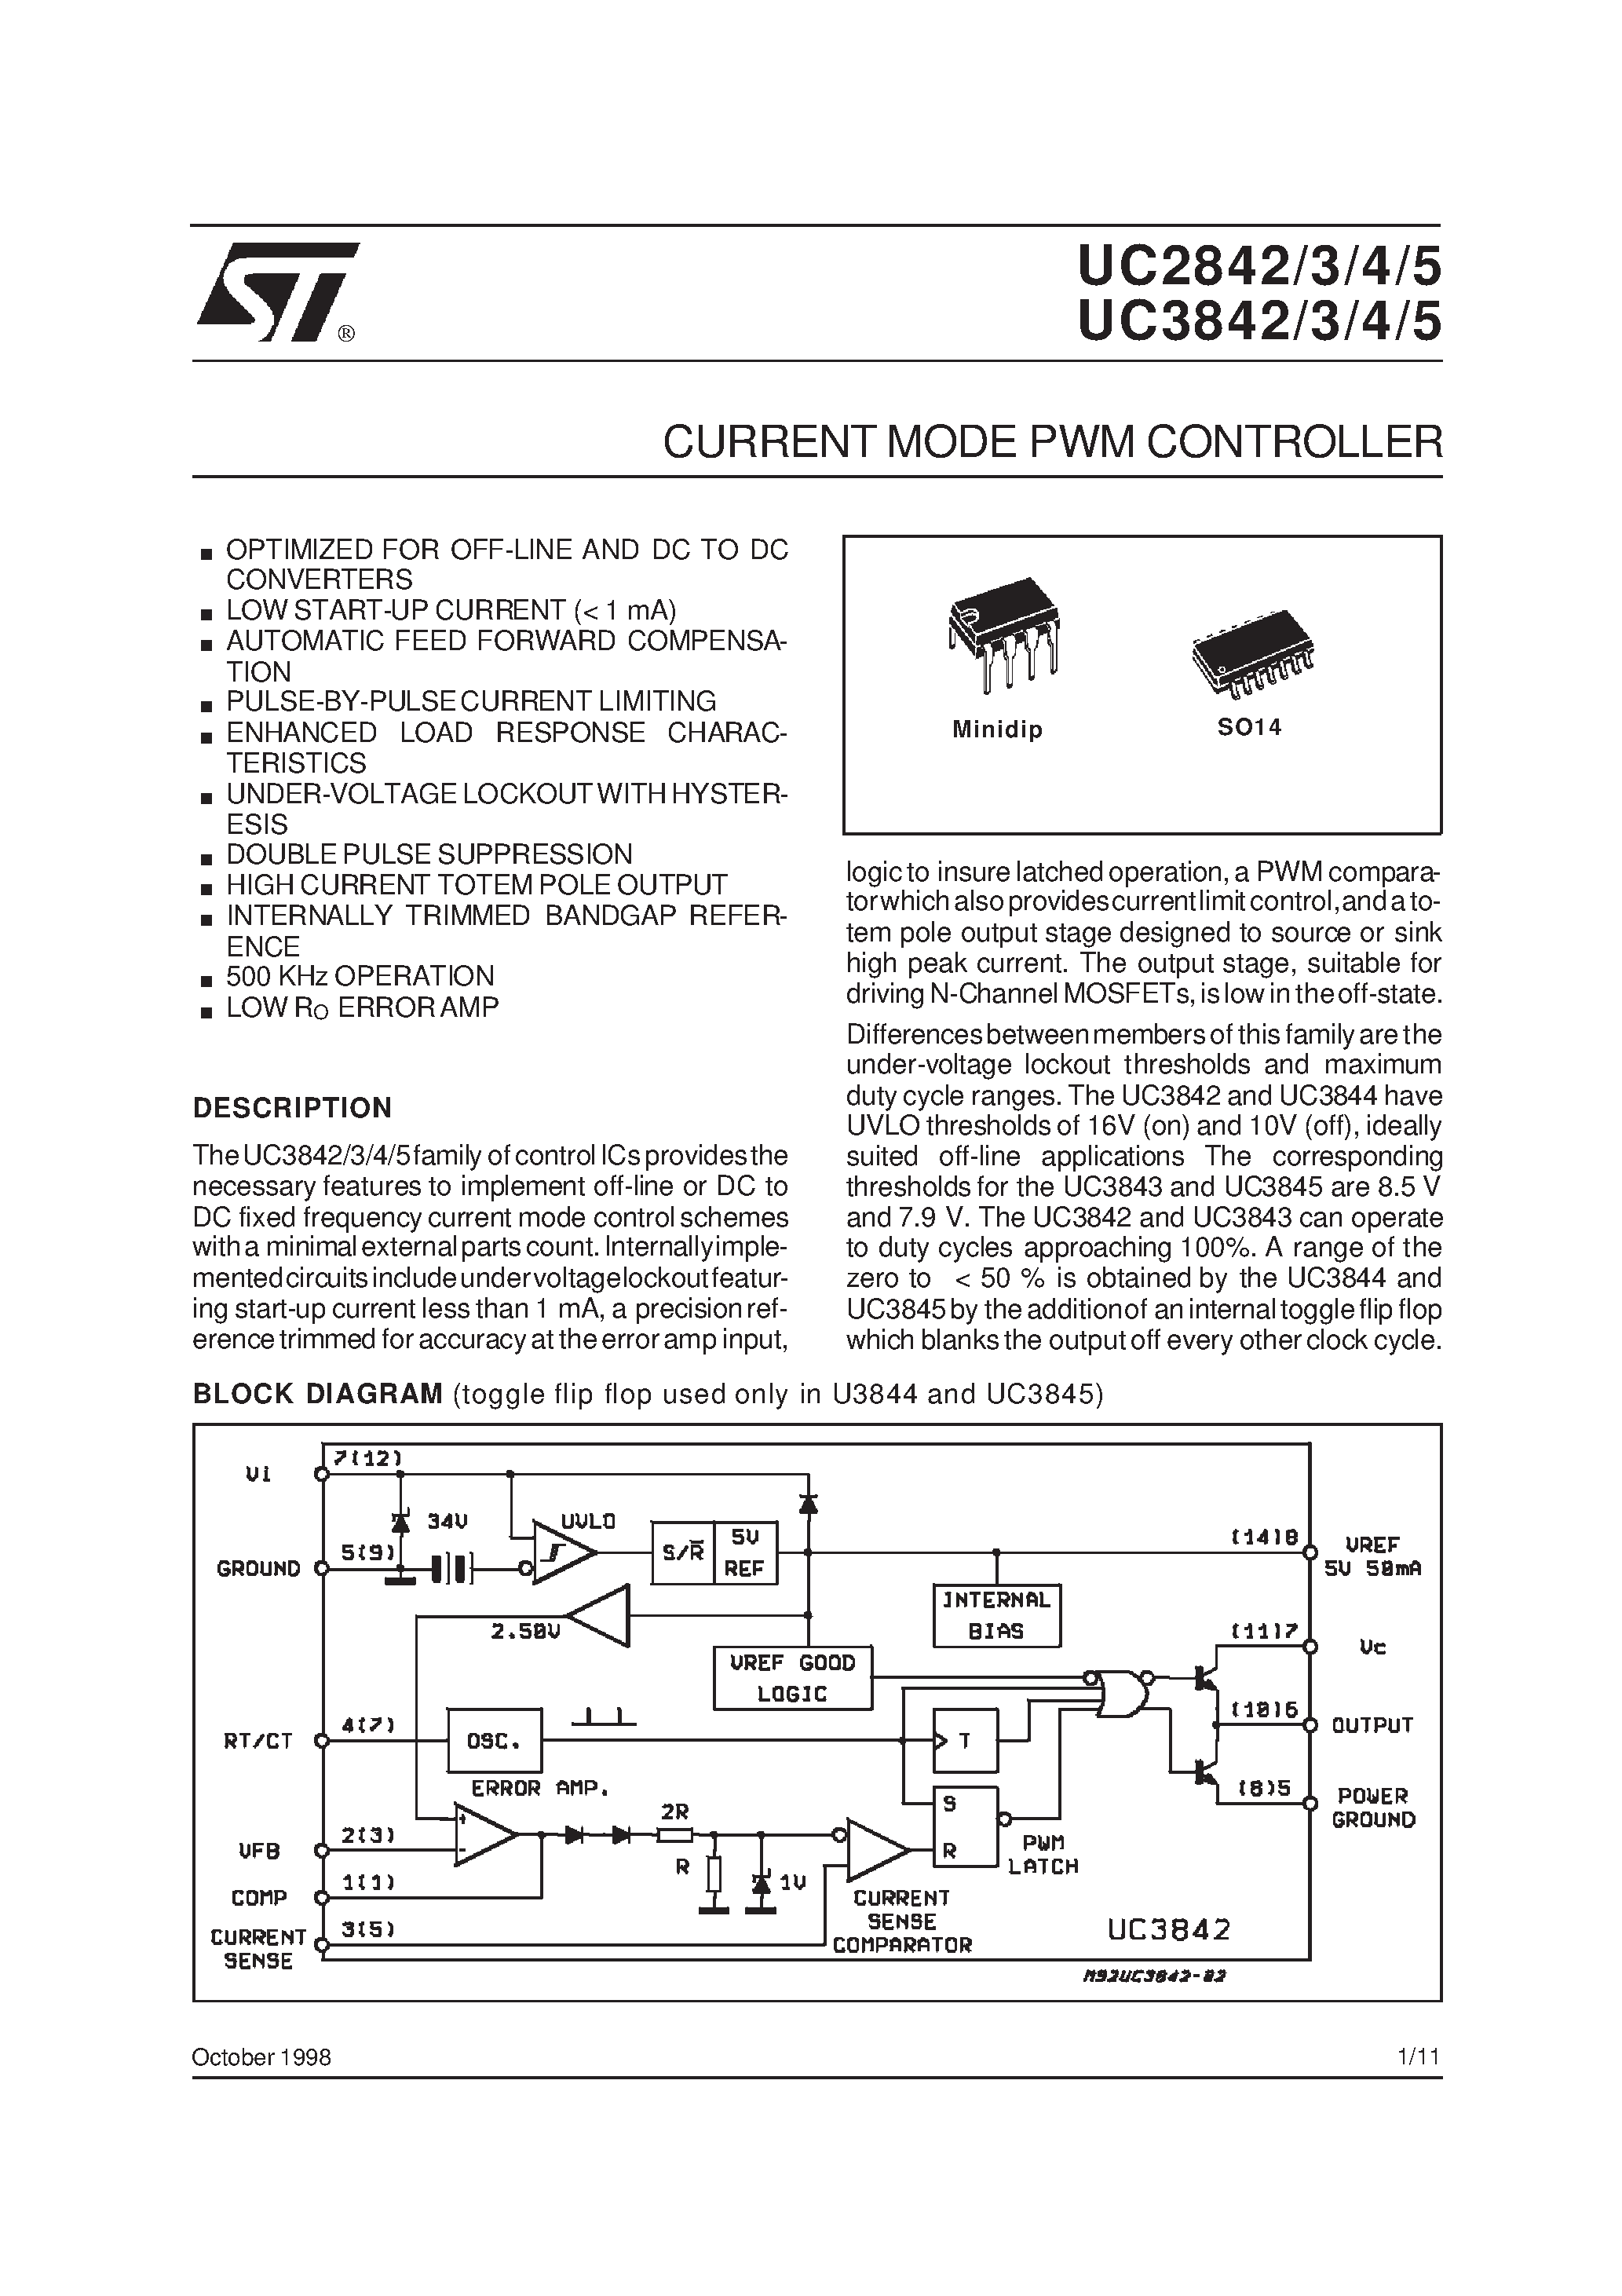 Datasheet UC2844 - CURRENTMODE PWM CONTROLLER page 1